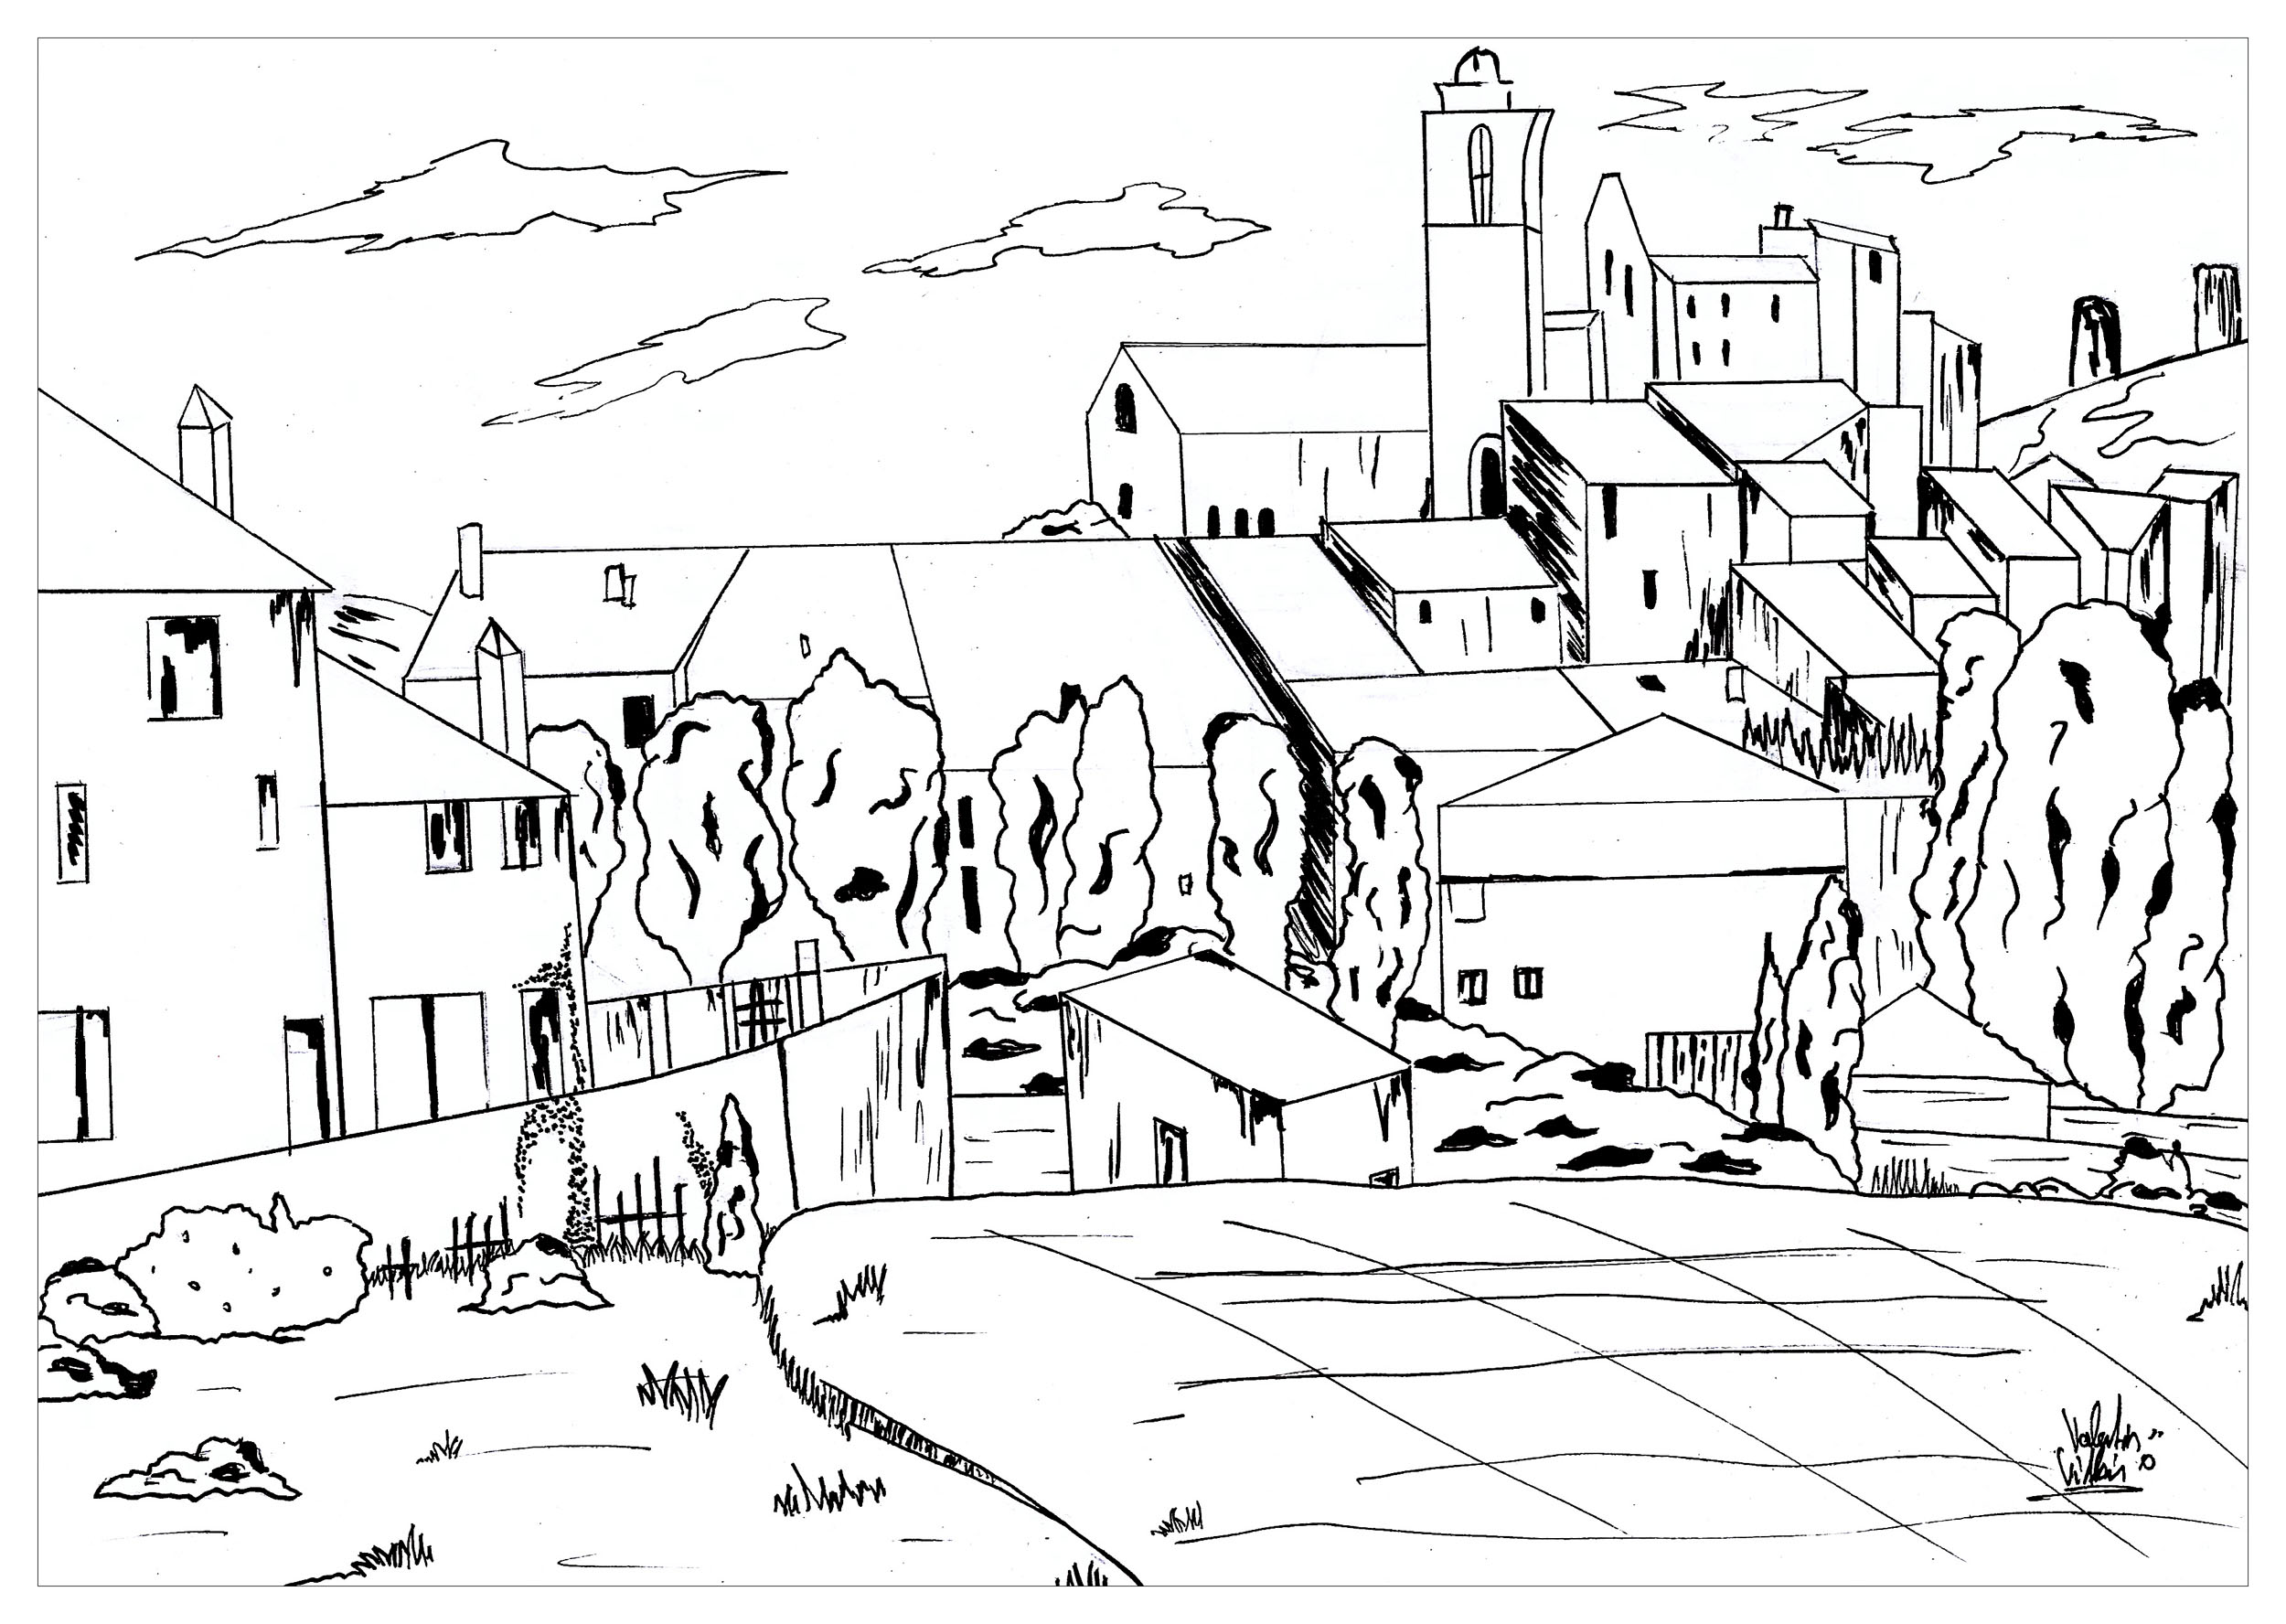 Coloring page inspired by a painting by Paul Cézanne, Gardanne, Artist : Valentin